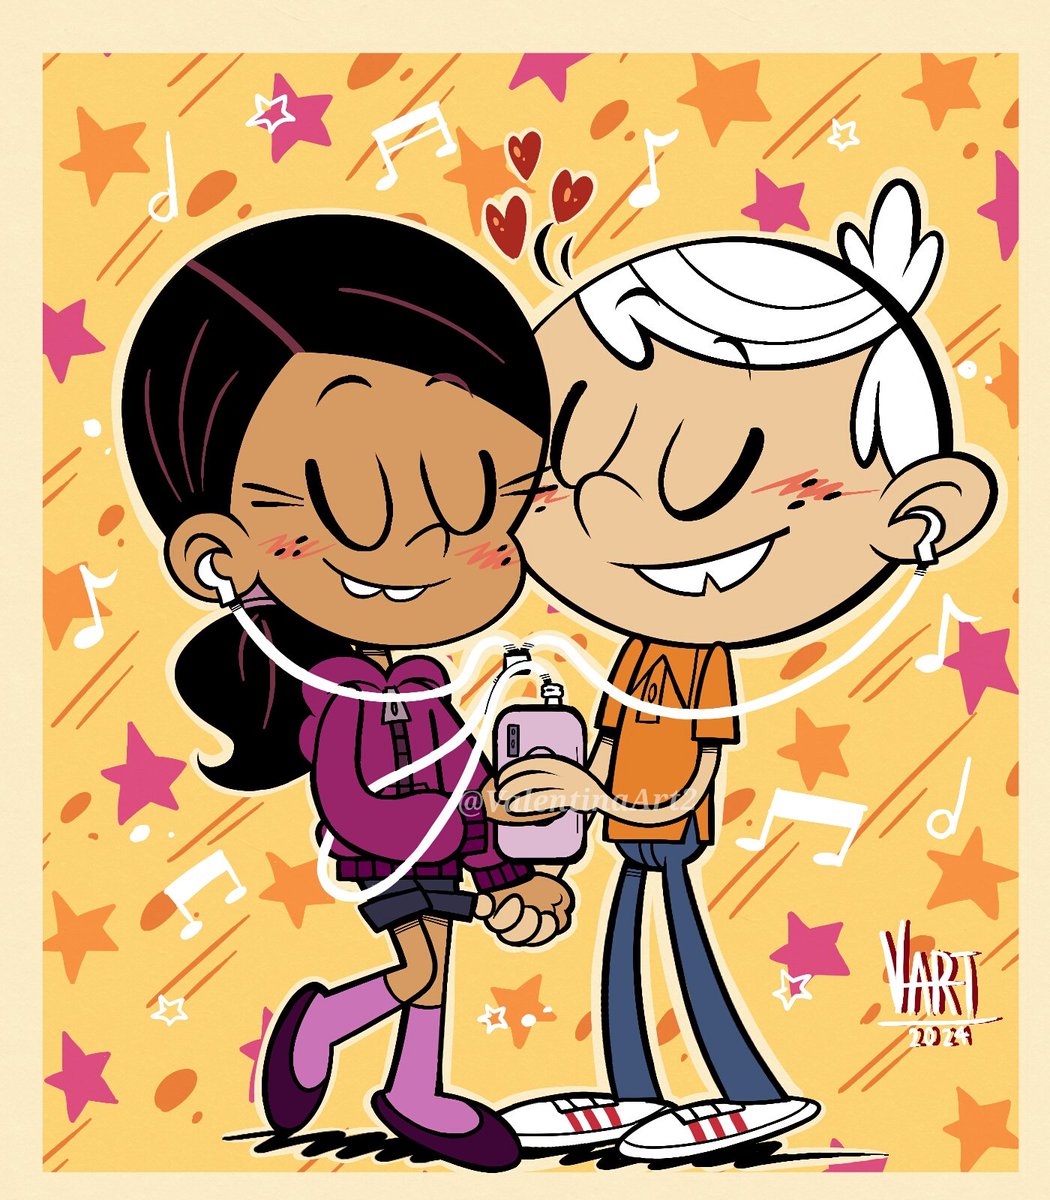 -Ronniecoln Redraw :D 🧡💜✨°•☆ #TheLoudHouse #TheCasagrandes #TheLoudHouseFanart #LincolnLoud #RonnieAnneSantiago #RonnieAnne #Ronniecoln #Redraw #myart #digitalart #digitalartist #ArtistOnTwitter 🧡💜✨°•☆